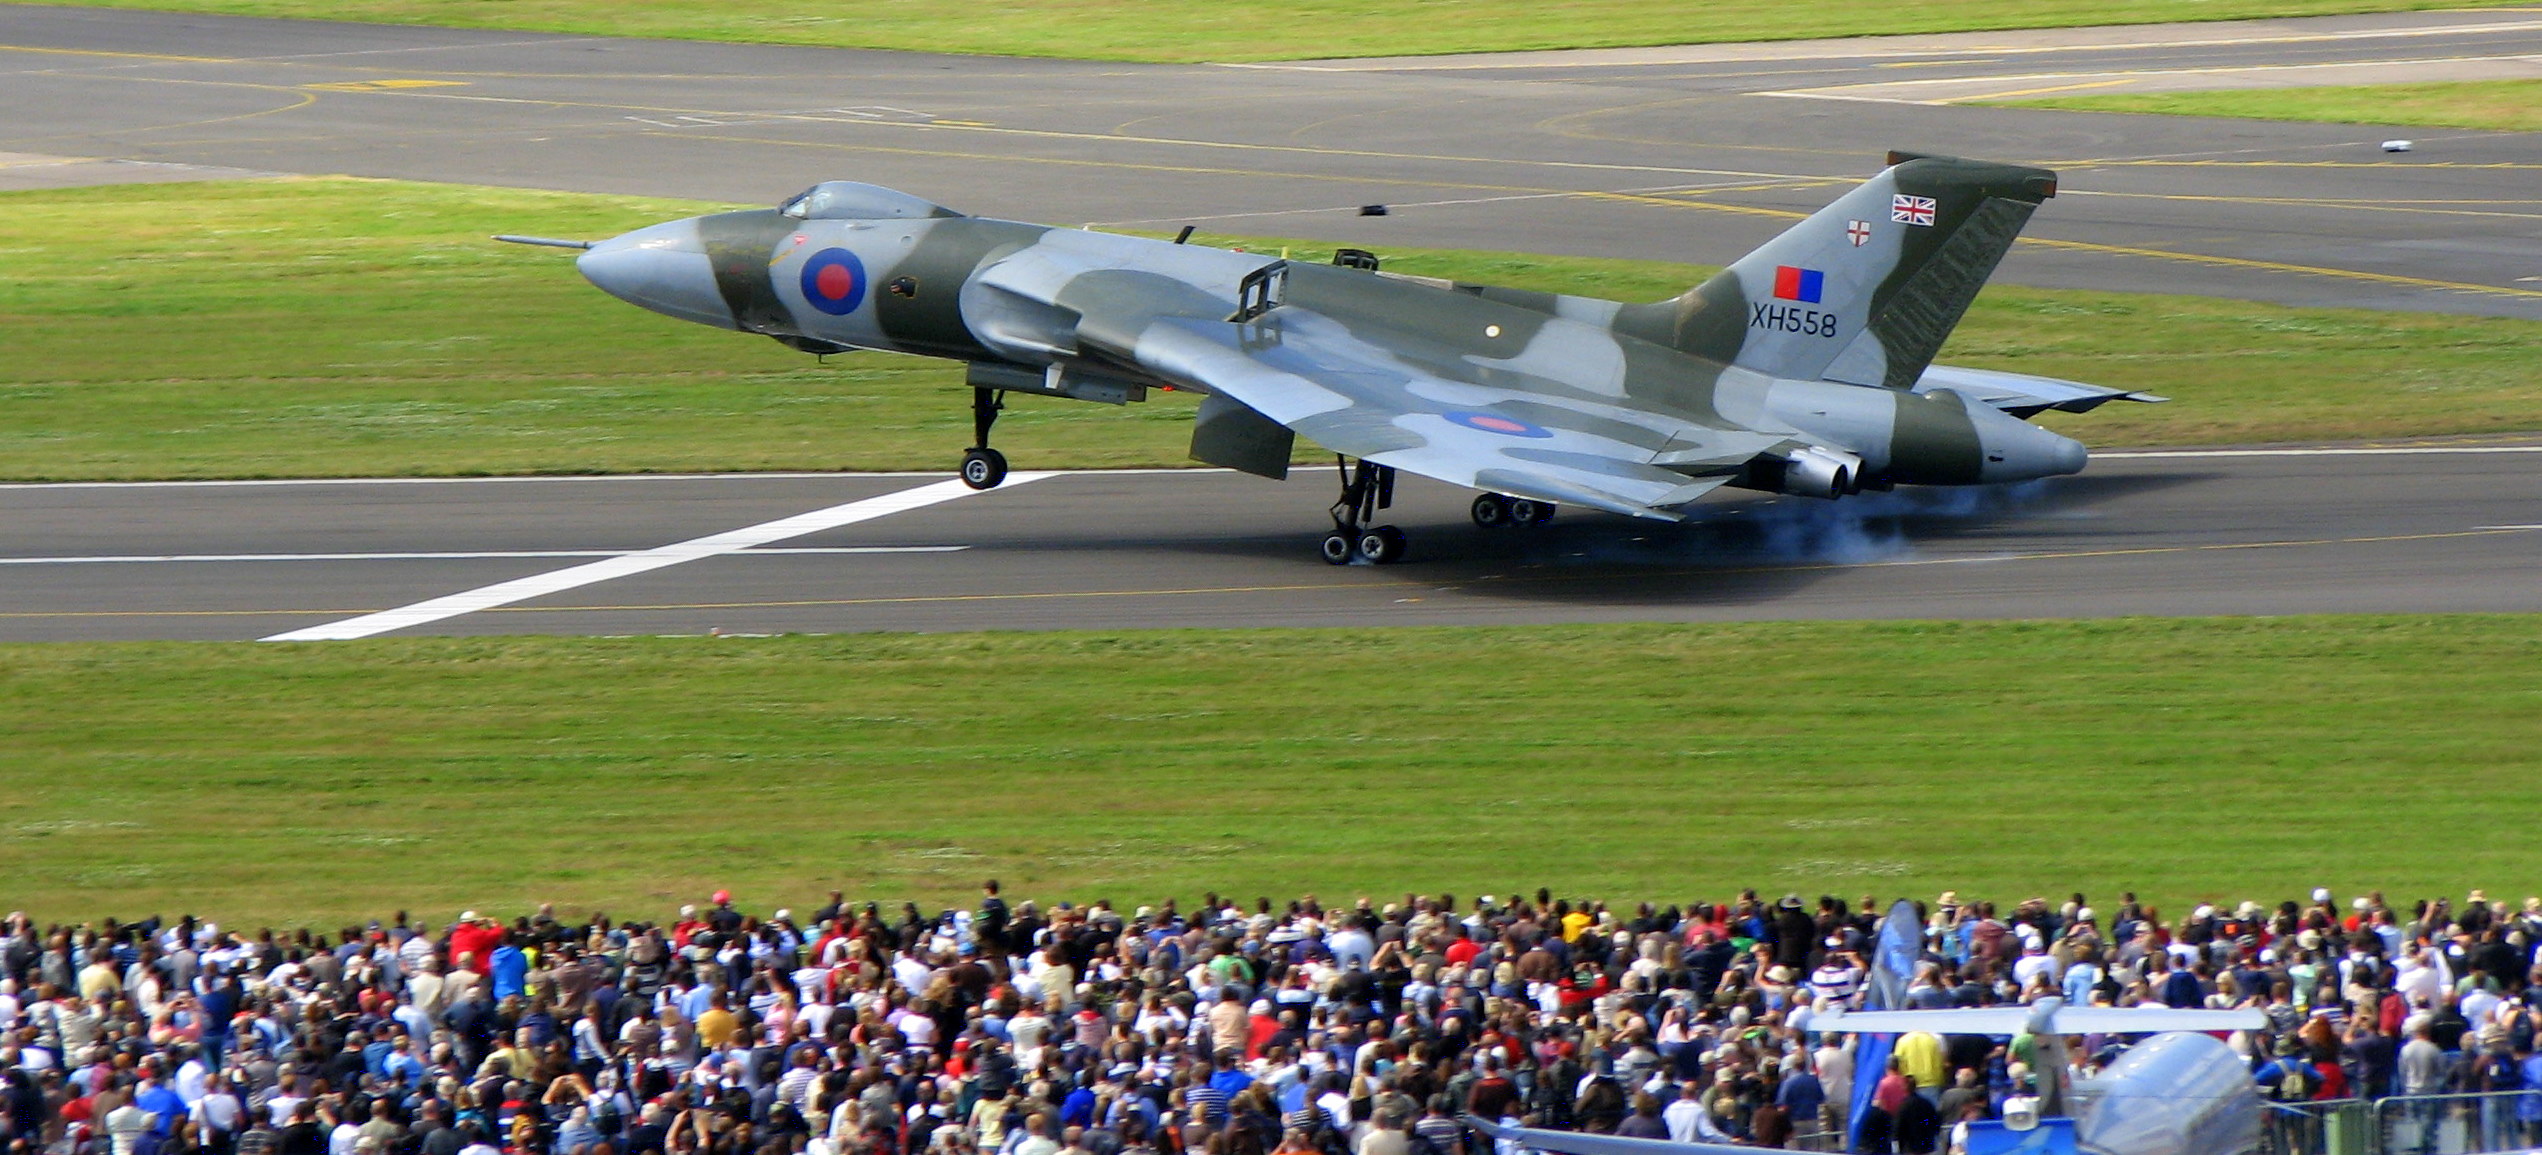 Last flying Vulcan in the world wows crowd at air show. (Image Credit: GregdeTours)